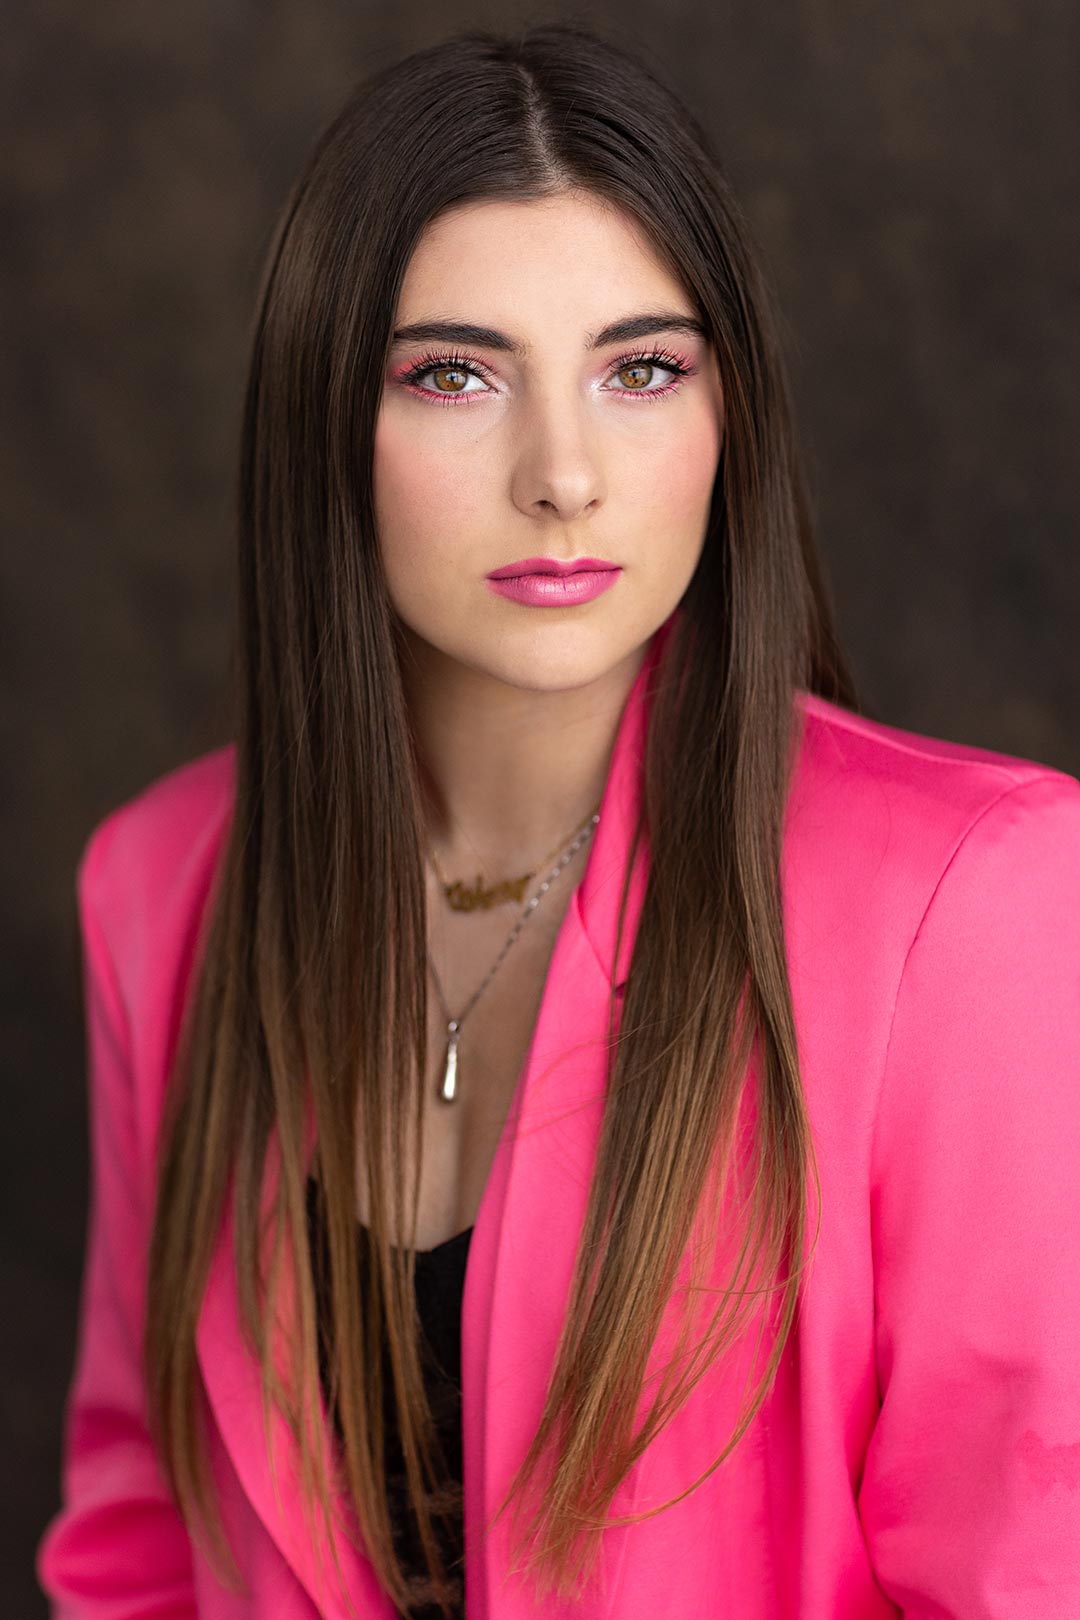 A senior girl smolders a smile in a hot pink jacket with matching lipstick and eye makeup done as a part of a themed shoot for Photography by Desirée's models team in Fort Collins Colorado. 